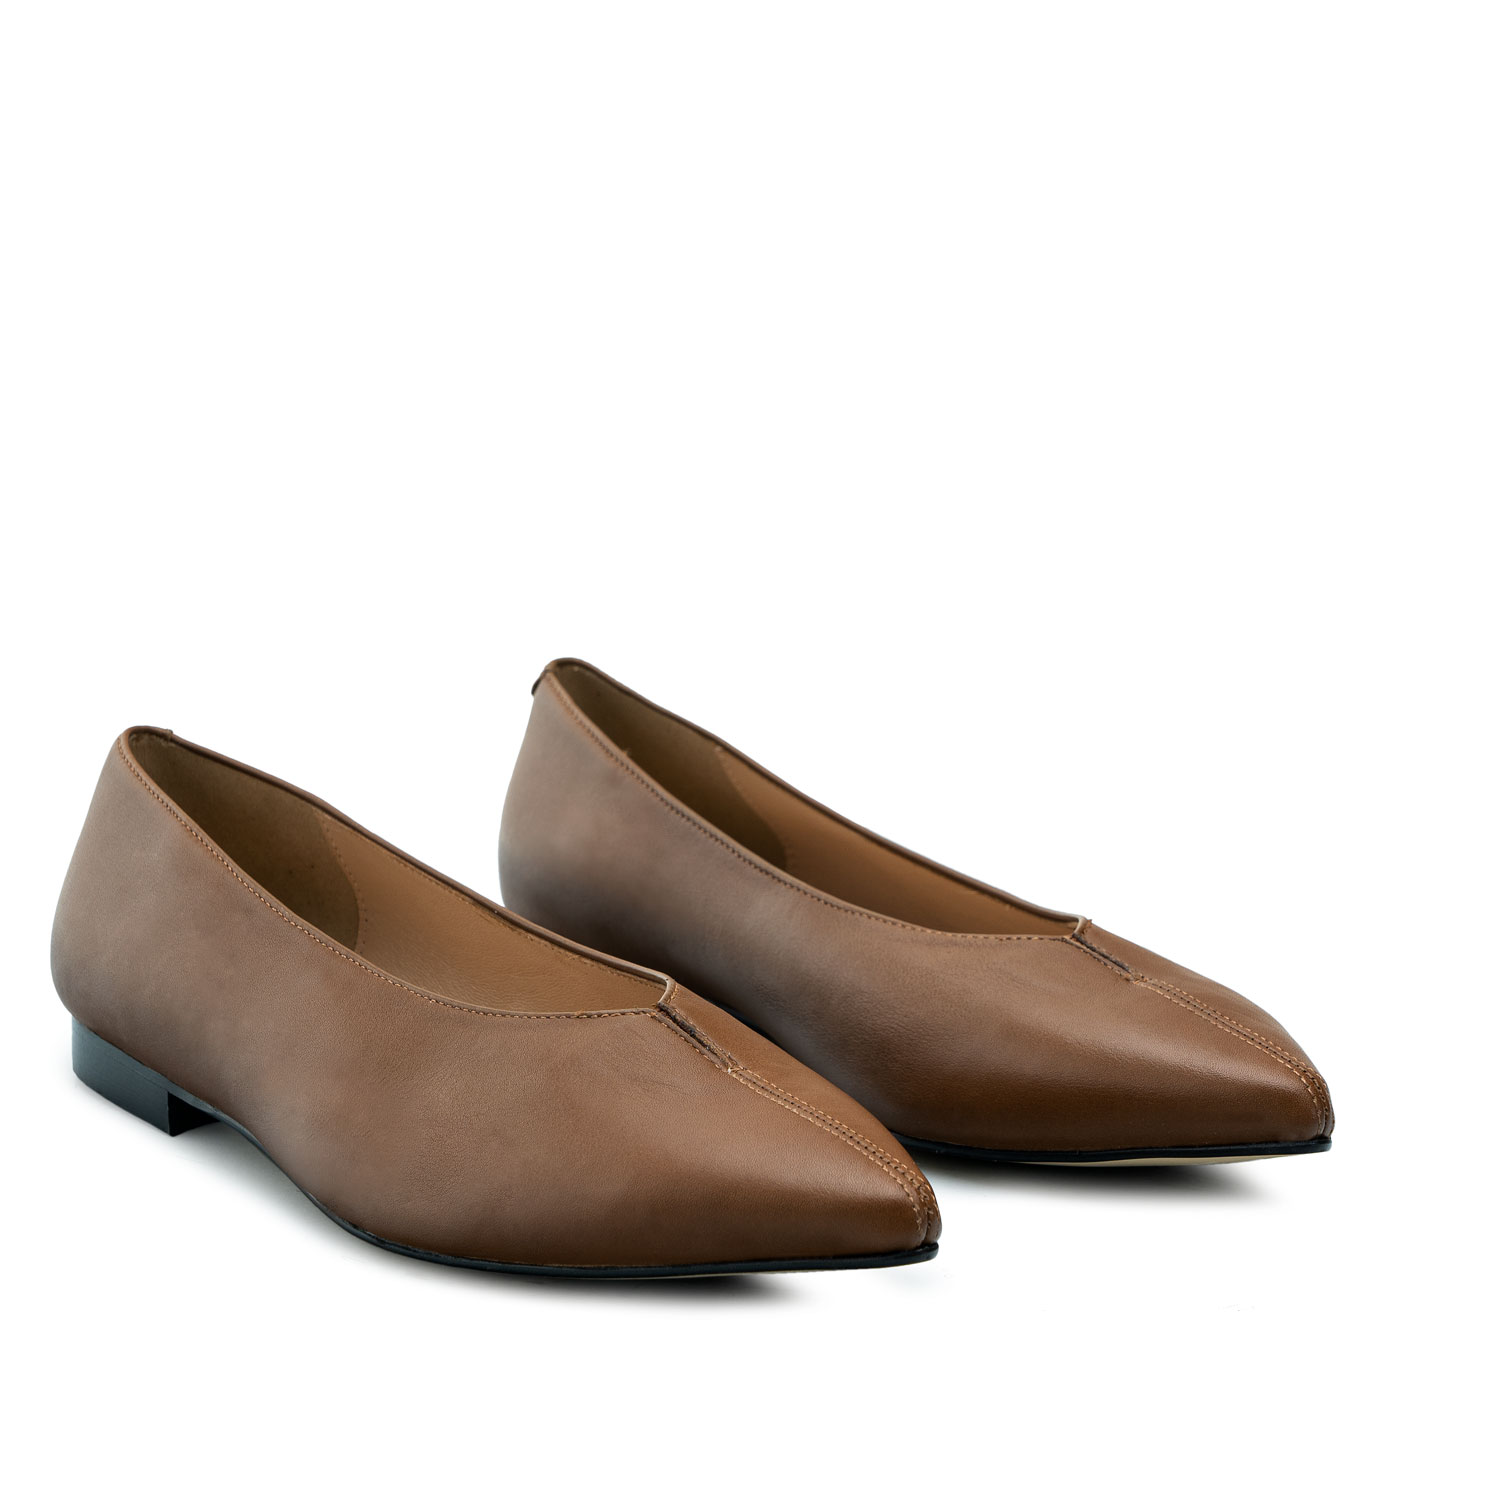 Flat Slip-on Shoes in Brown Leather